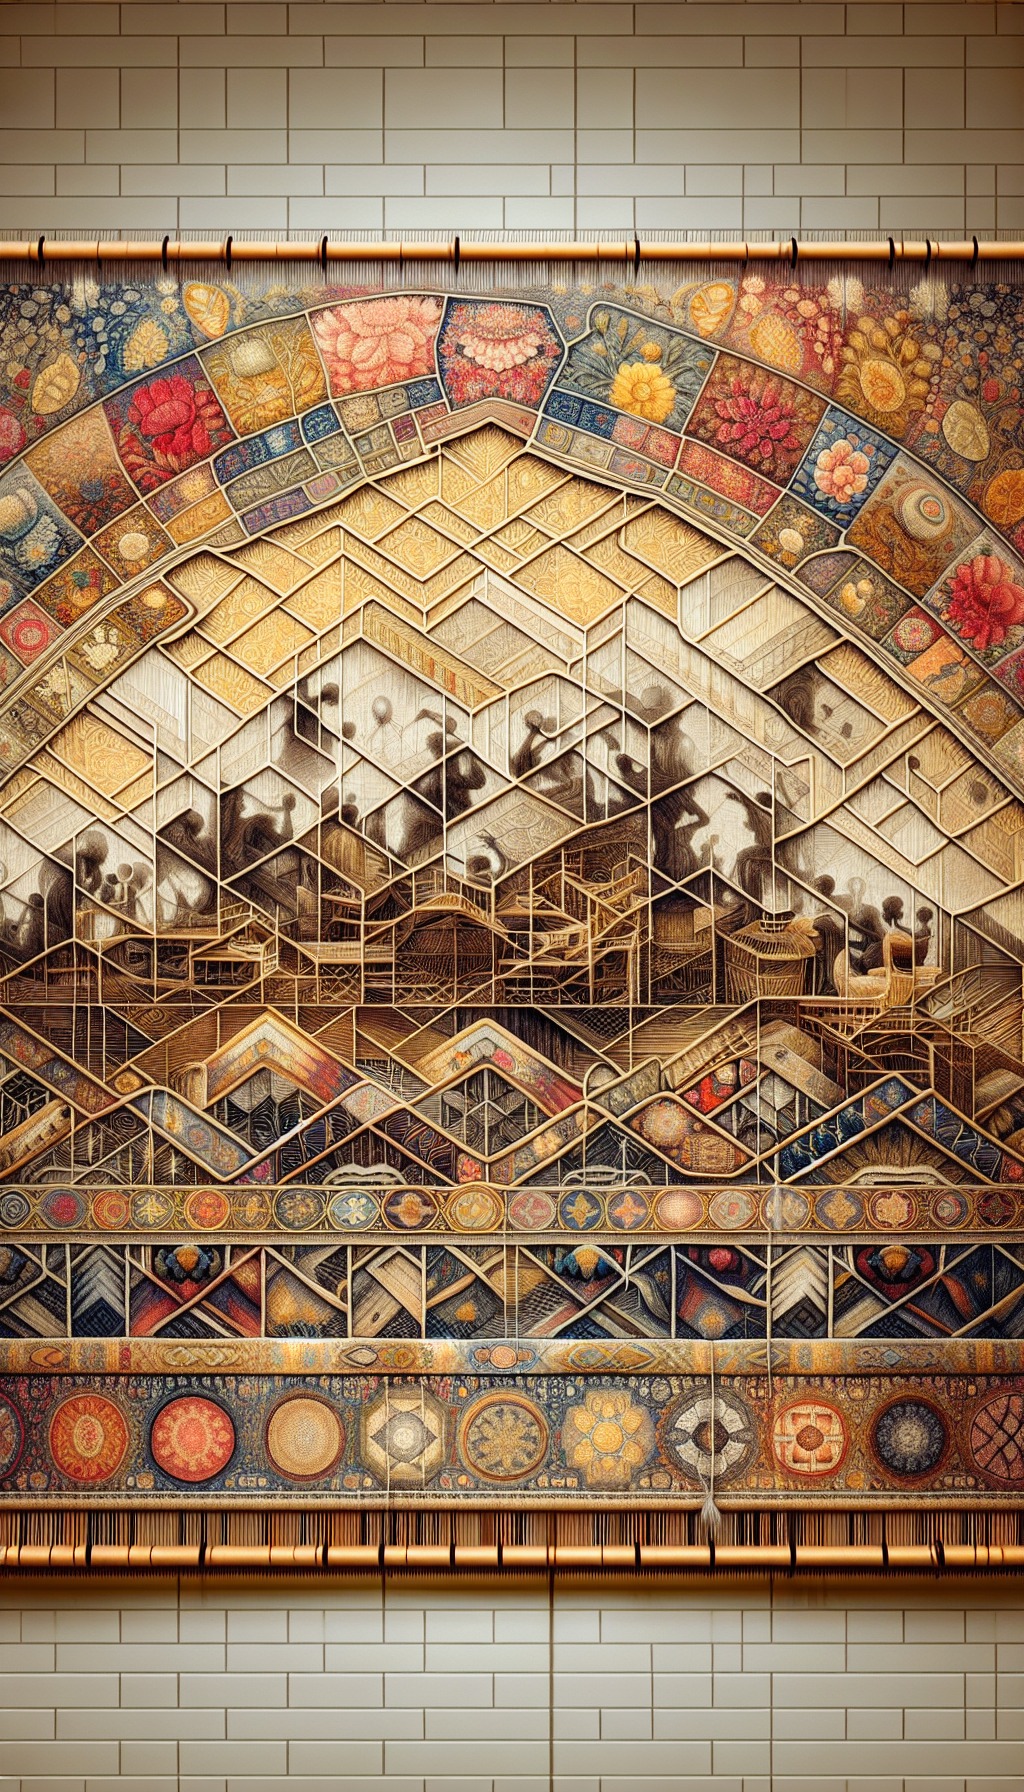 An intricate tapestry forms the backdrop, with geometric and floral weaving patterns emerging from an antique basket. Within these textures, ghostly outlines of weavers appear, almost as watermarks, suggesting the timeless craftsmanship. Each segment subtly transitions in style—from realistic to abstract, from Impressionist strokes to Cubist angles—symbolizing the evolution of weaving and the detective work in identifying historical baskets.